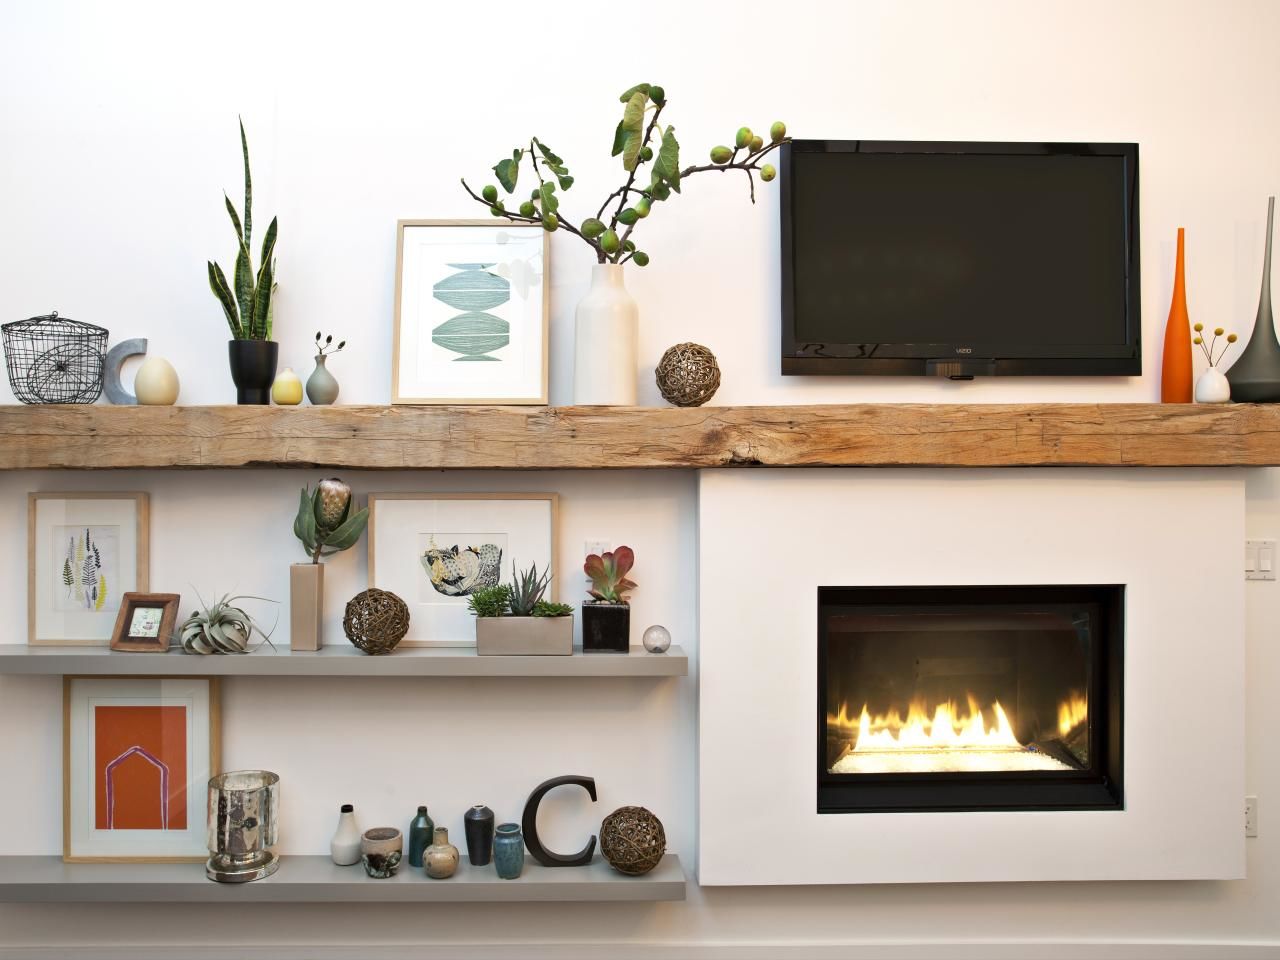 tips diy and decorate your fireplace mantel shelf extended floating coat rack storage unit over window wall shelves with lights mounted fold down desk ikea kitchen furniture back